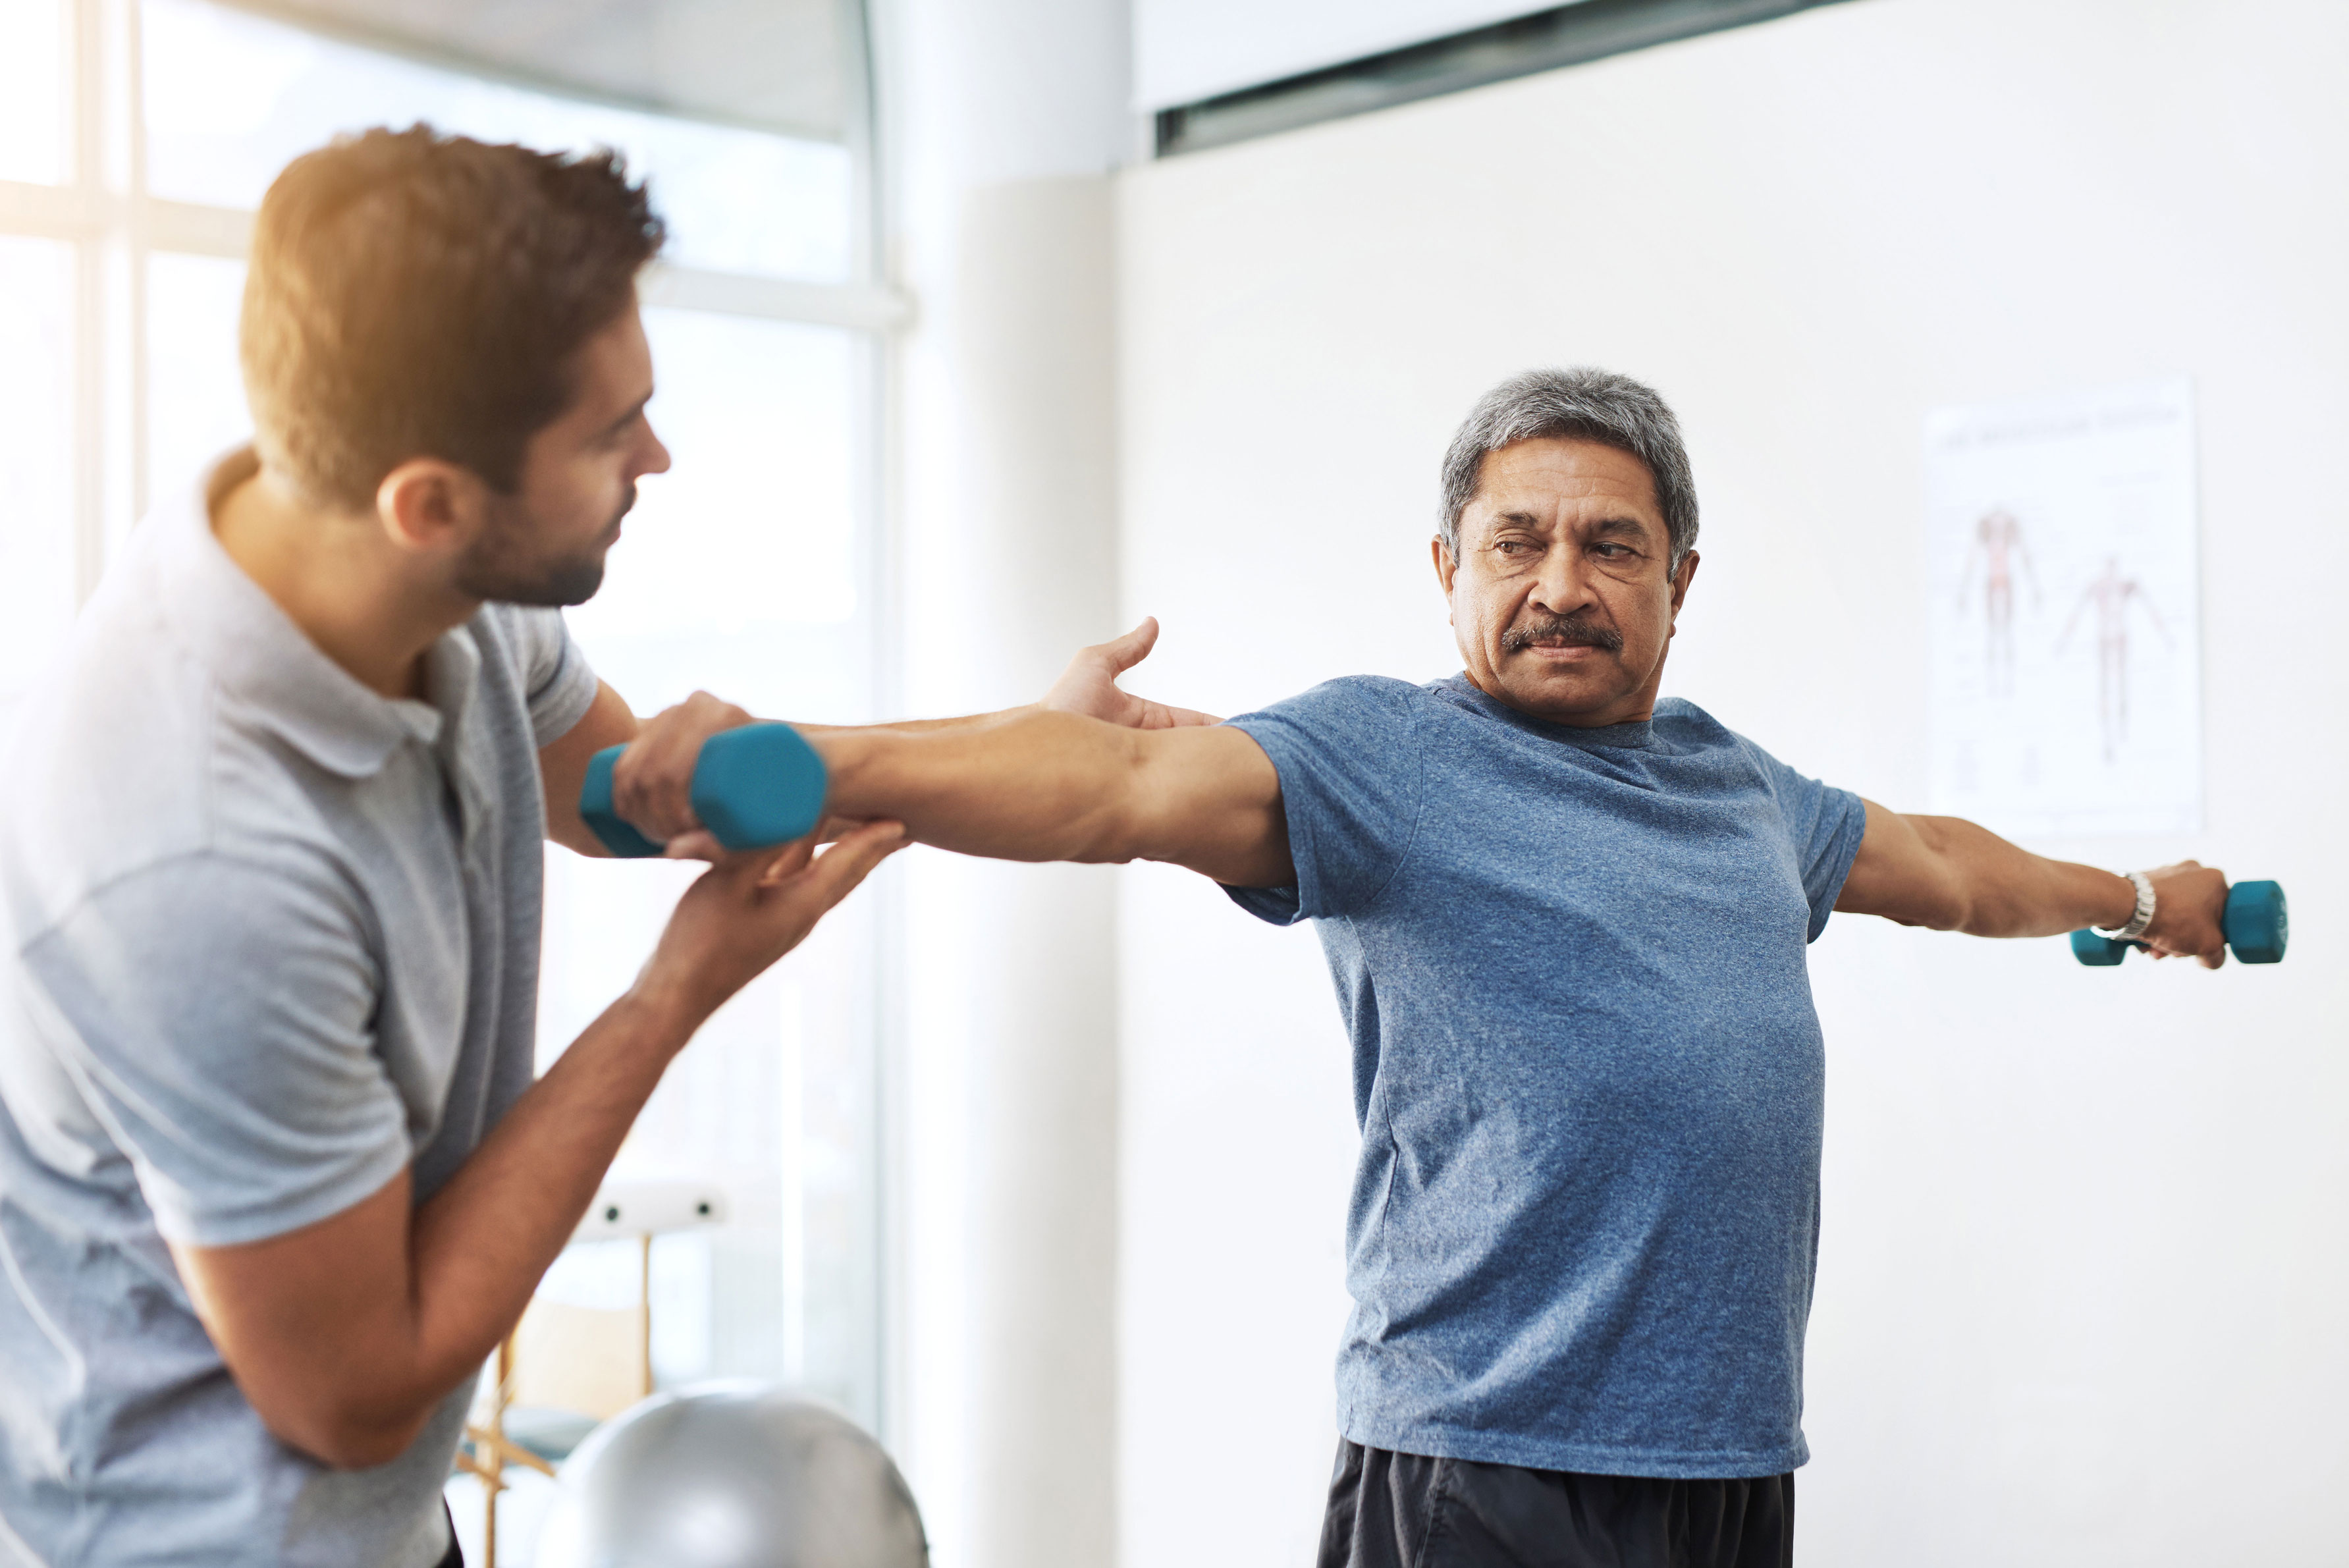 Image of physical therapist helping patient with strength training